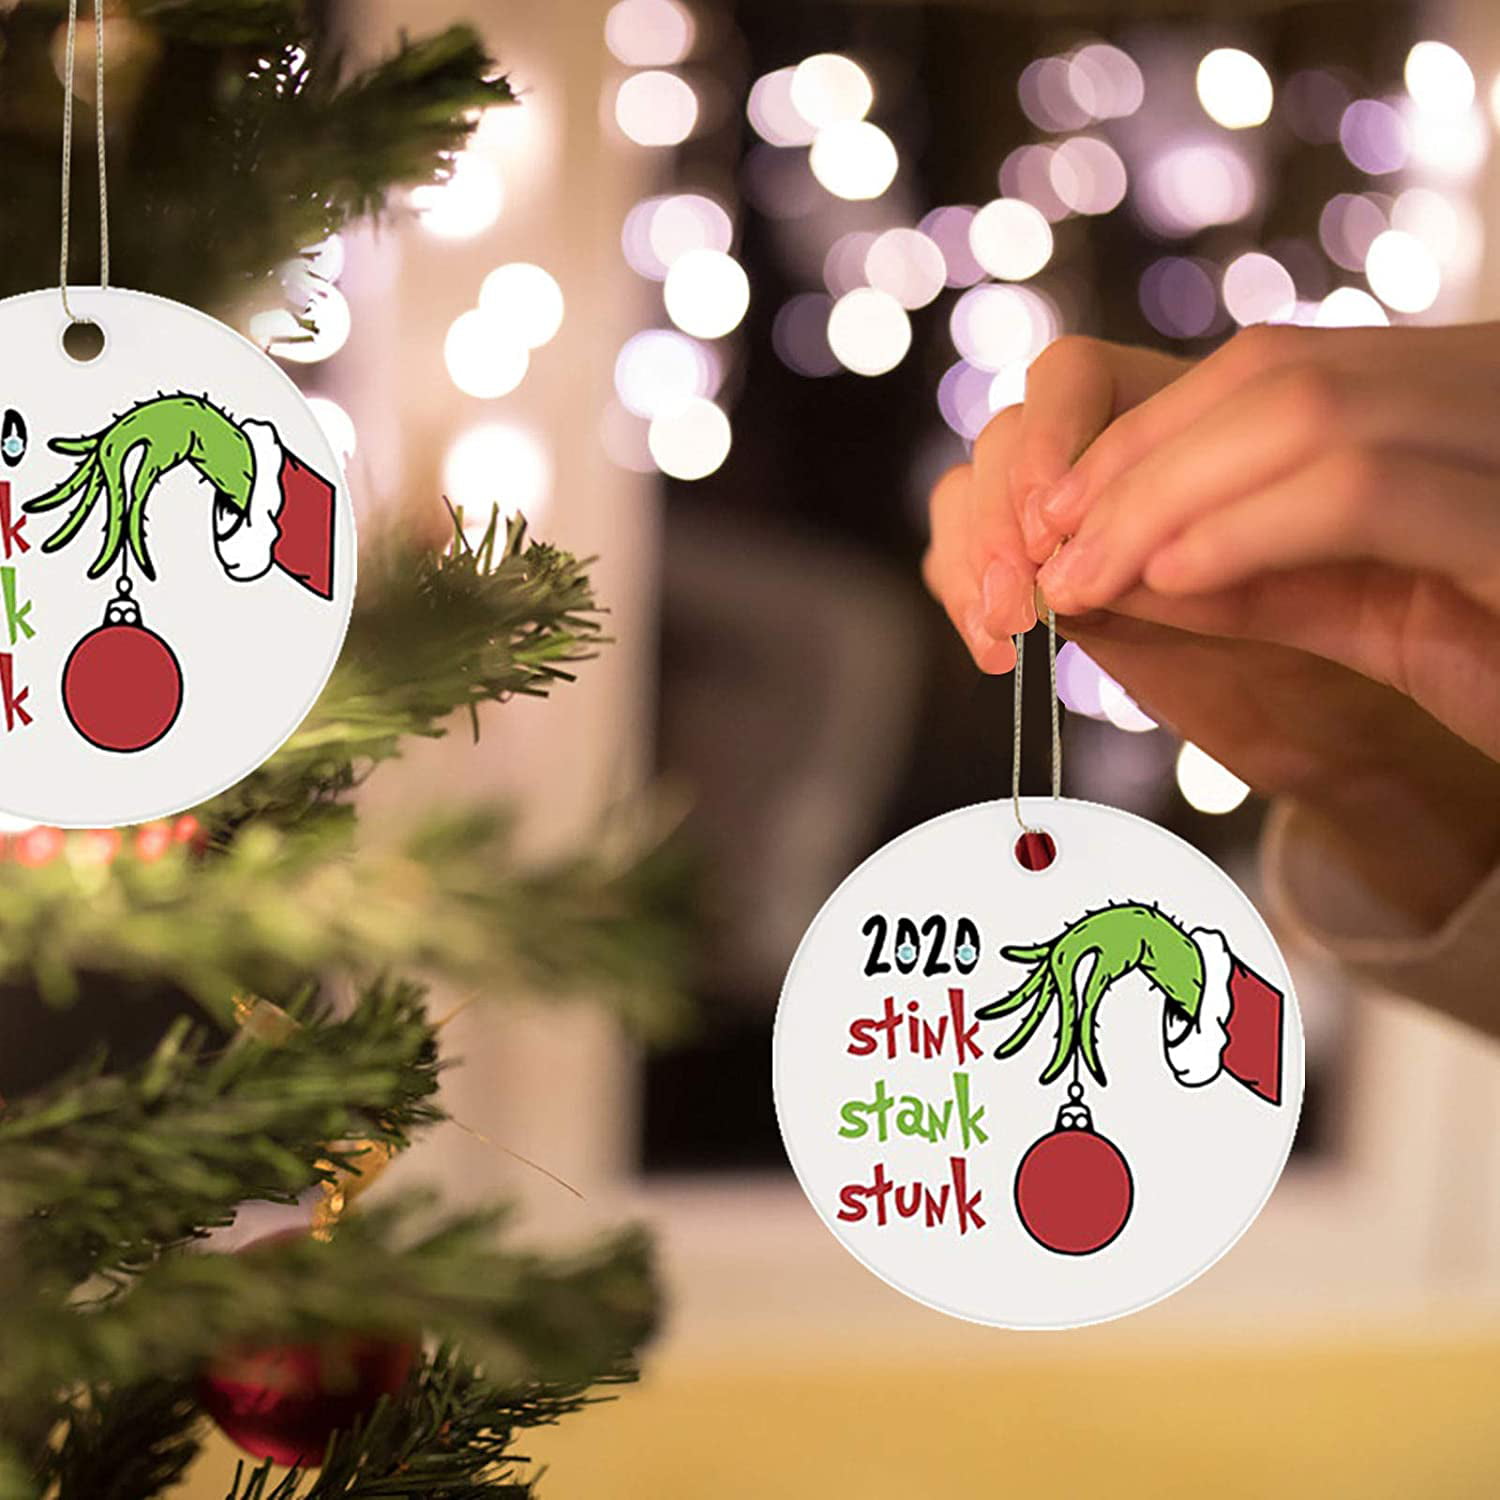 Mr. and Mrs. E Christmas Tree Decorations Hanging Pendant 2021 Grinch Hand Christmas Ornament,Unique Stink Stank Stunk Grinch Ornaments for Christmas Tree Decor